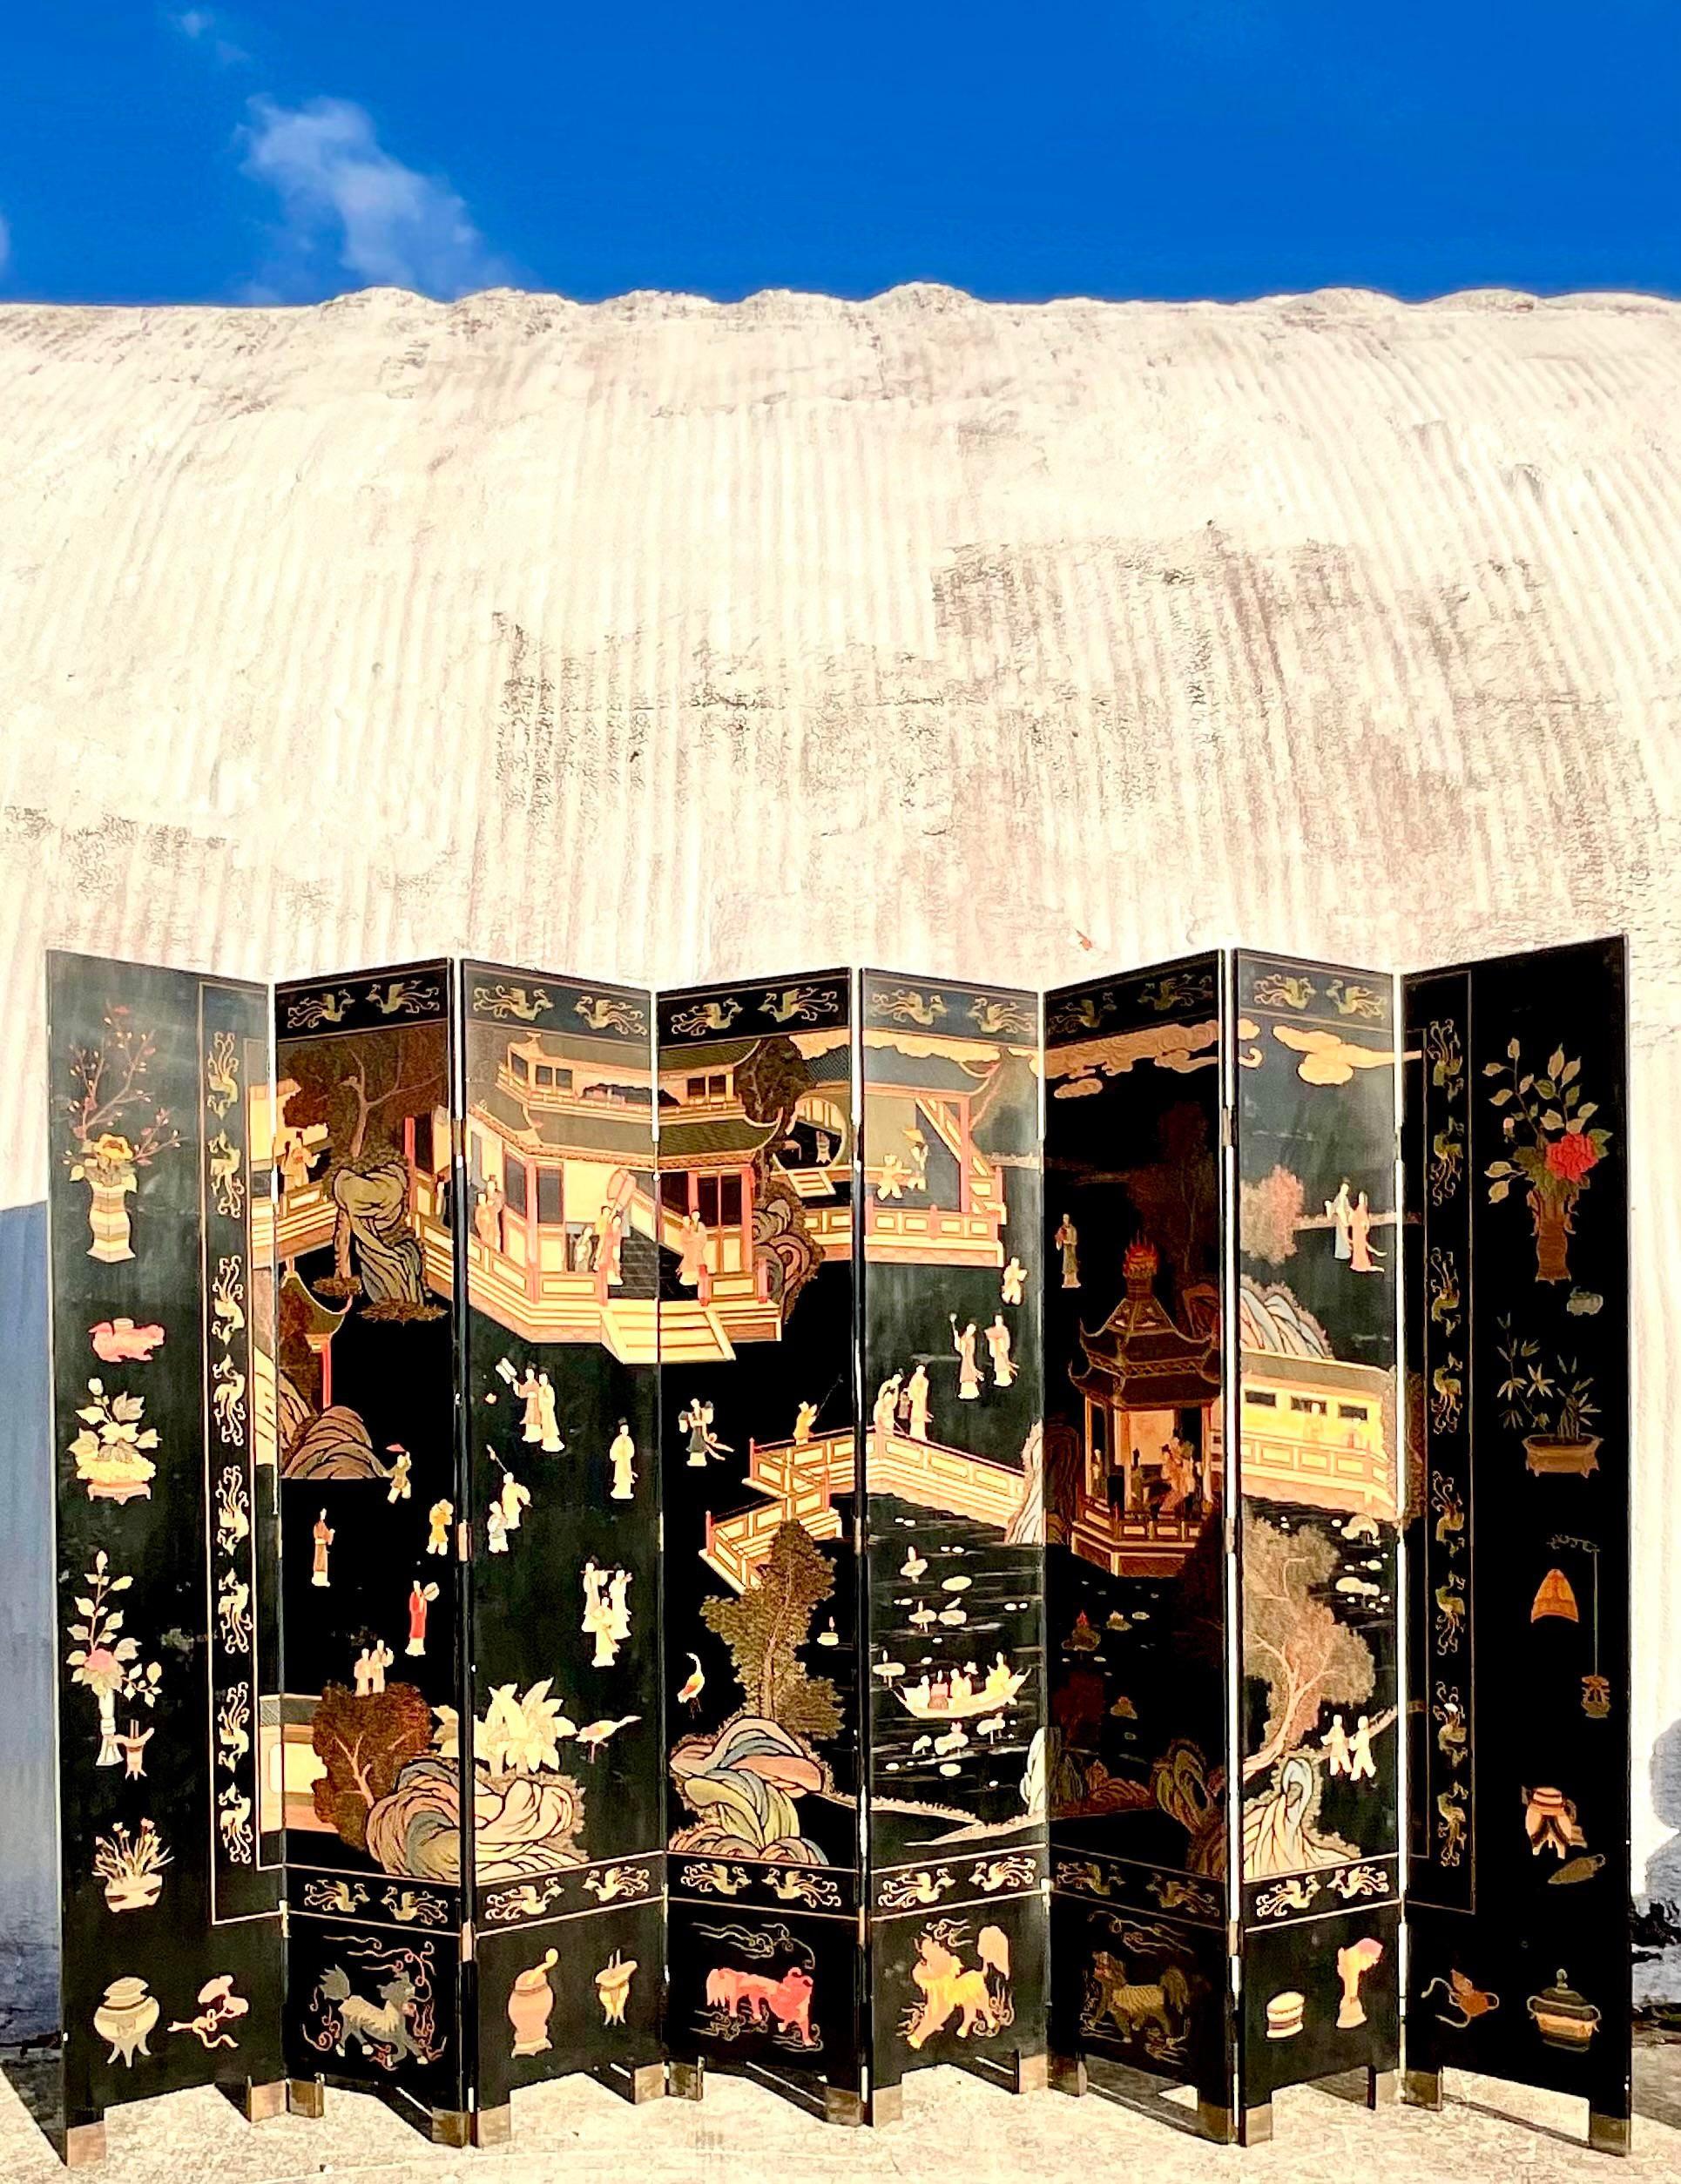 Incredible vintage Asian folding screen. An iconic Coromandel design with floating Asian figures and scenes of a small town. Truly striking. Acquired from a Palm Beach estate.